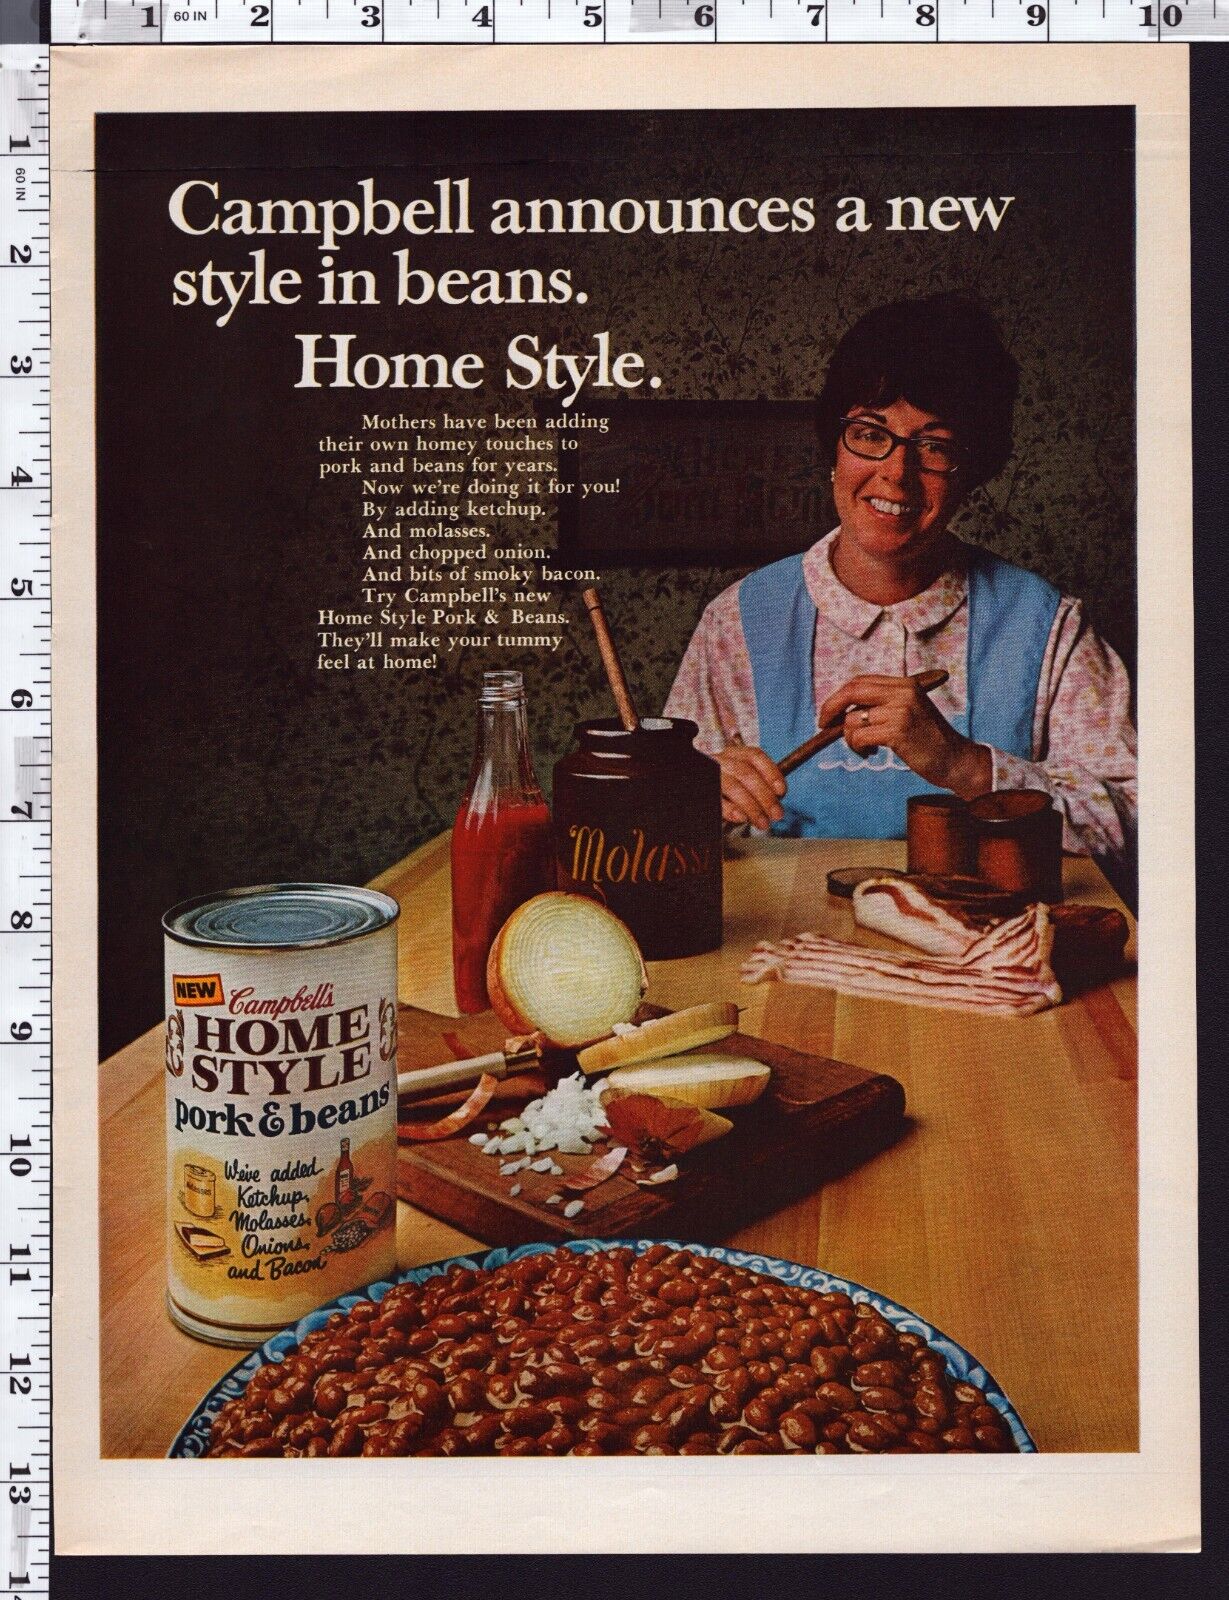 1969 Vintage Print Ad Campbell's Home Style Pork & Beans